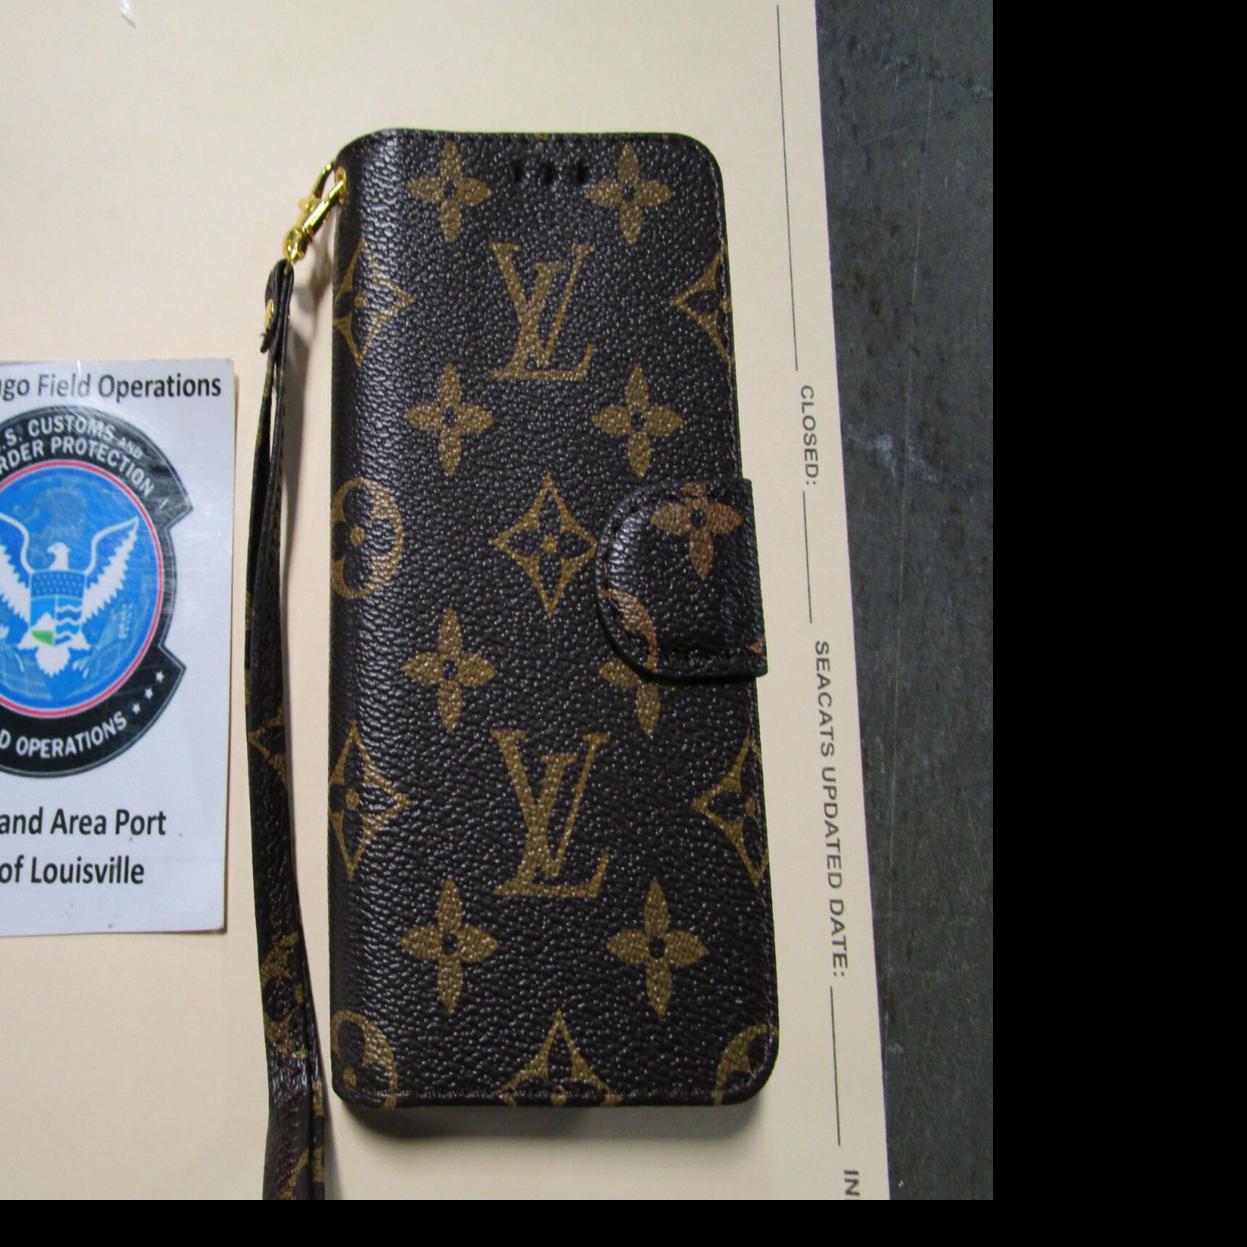 Gucci Belts for sale in Orlando, Florida, Facebook Marketplace